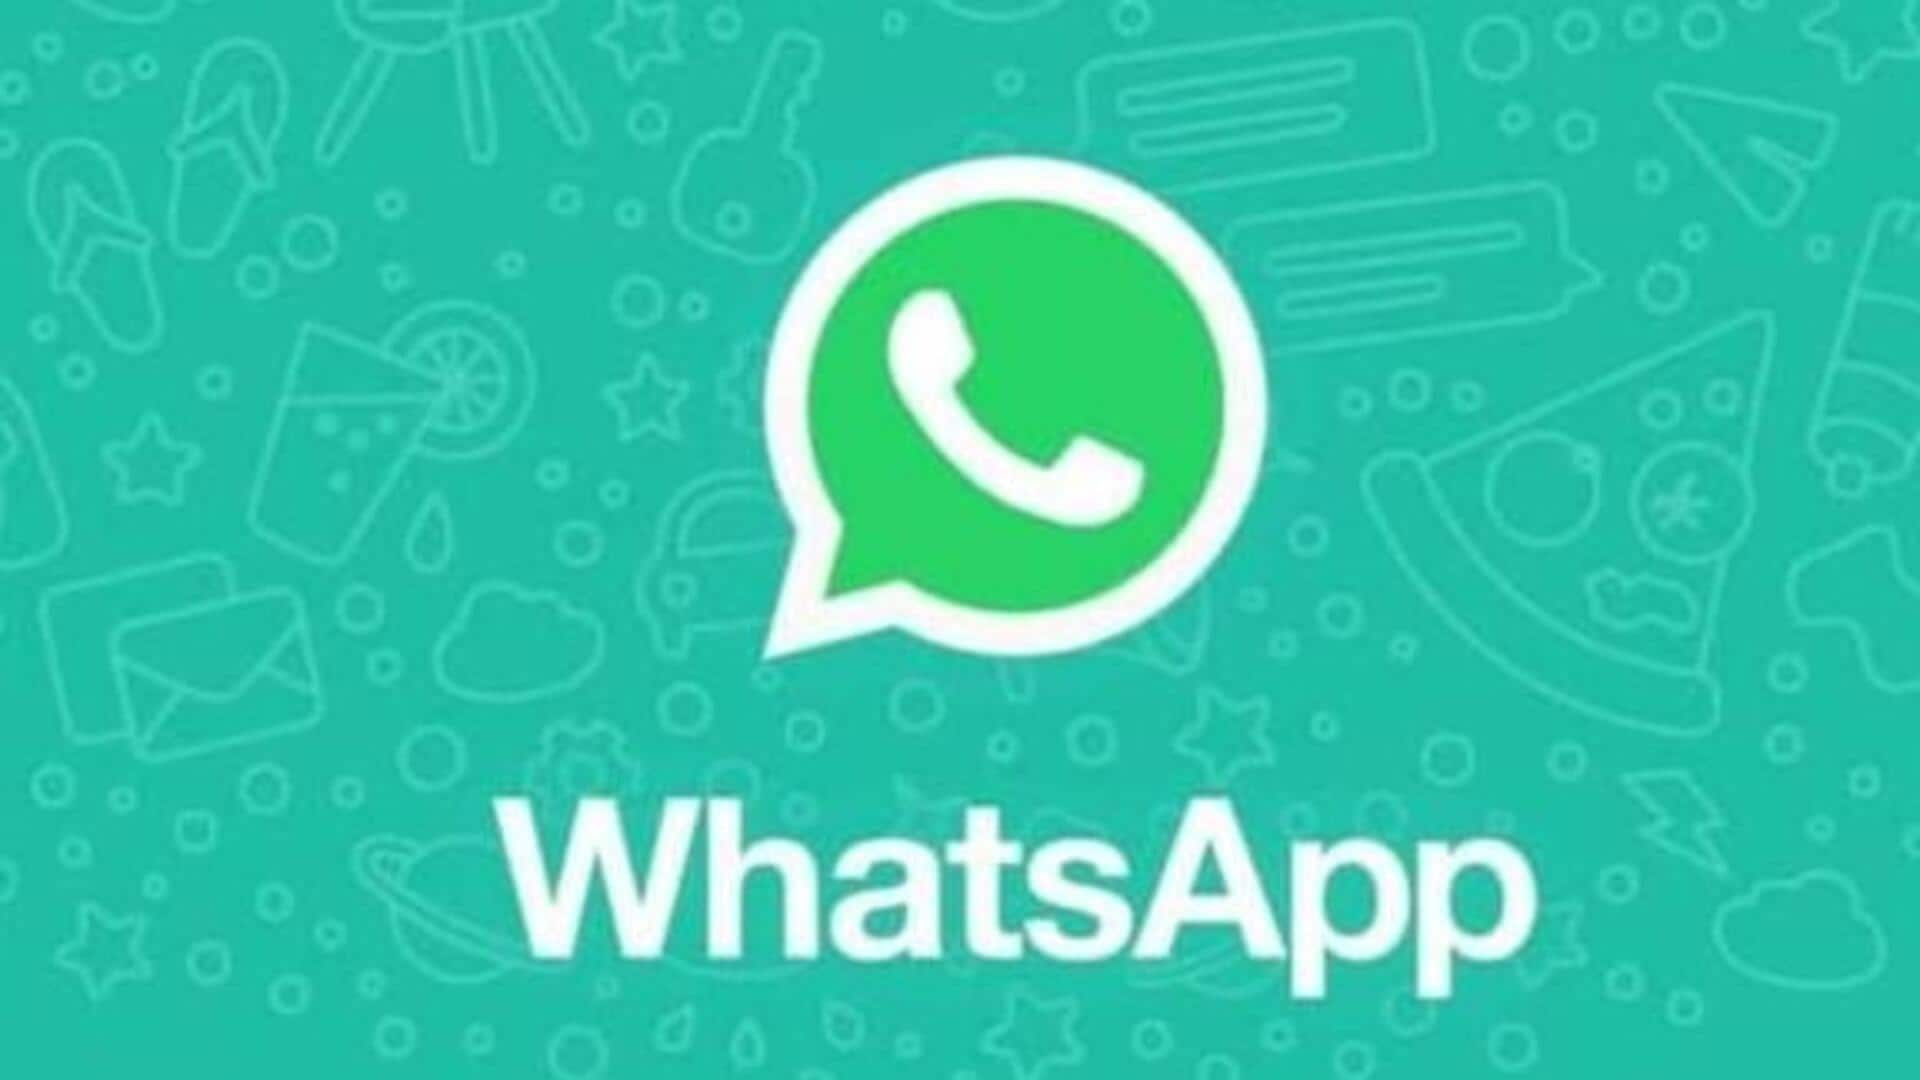 WhatsApp introduces new group chat feature for iOS users